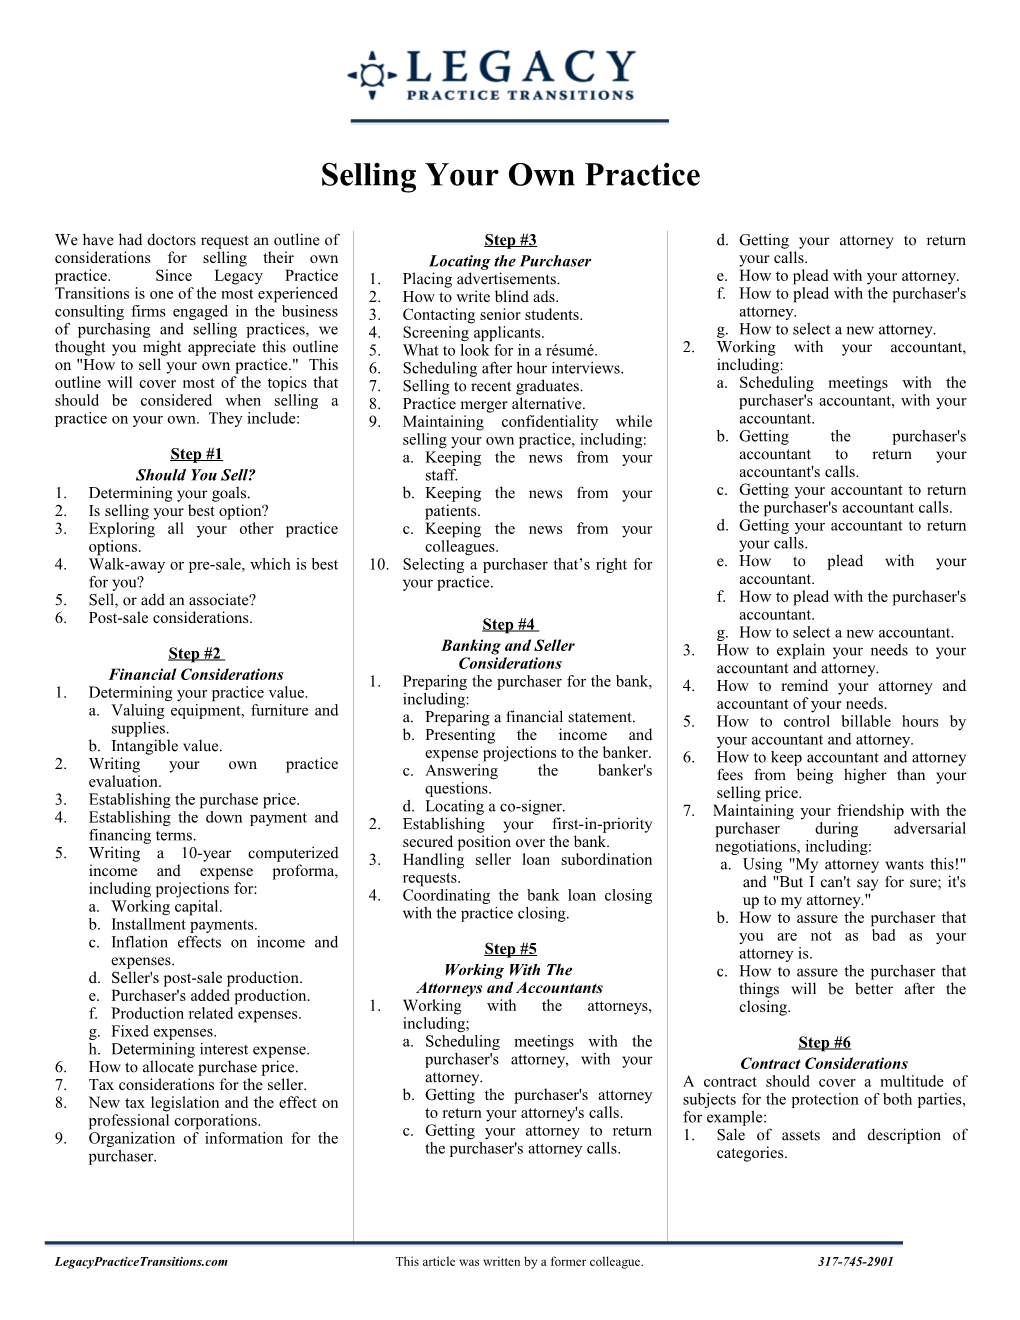 Selling Your Own Practice